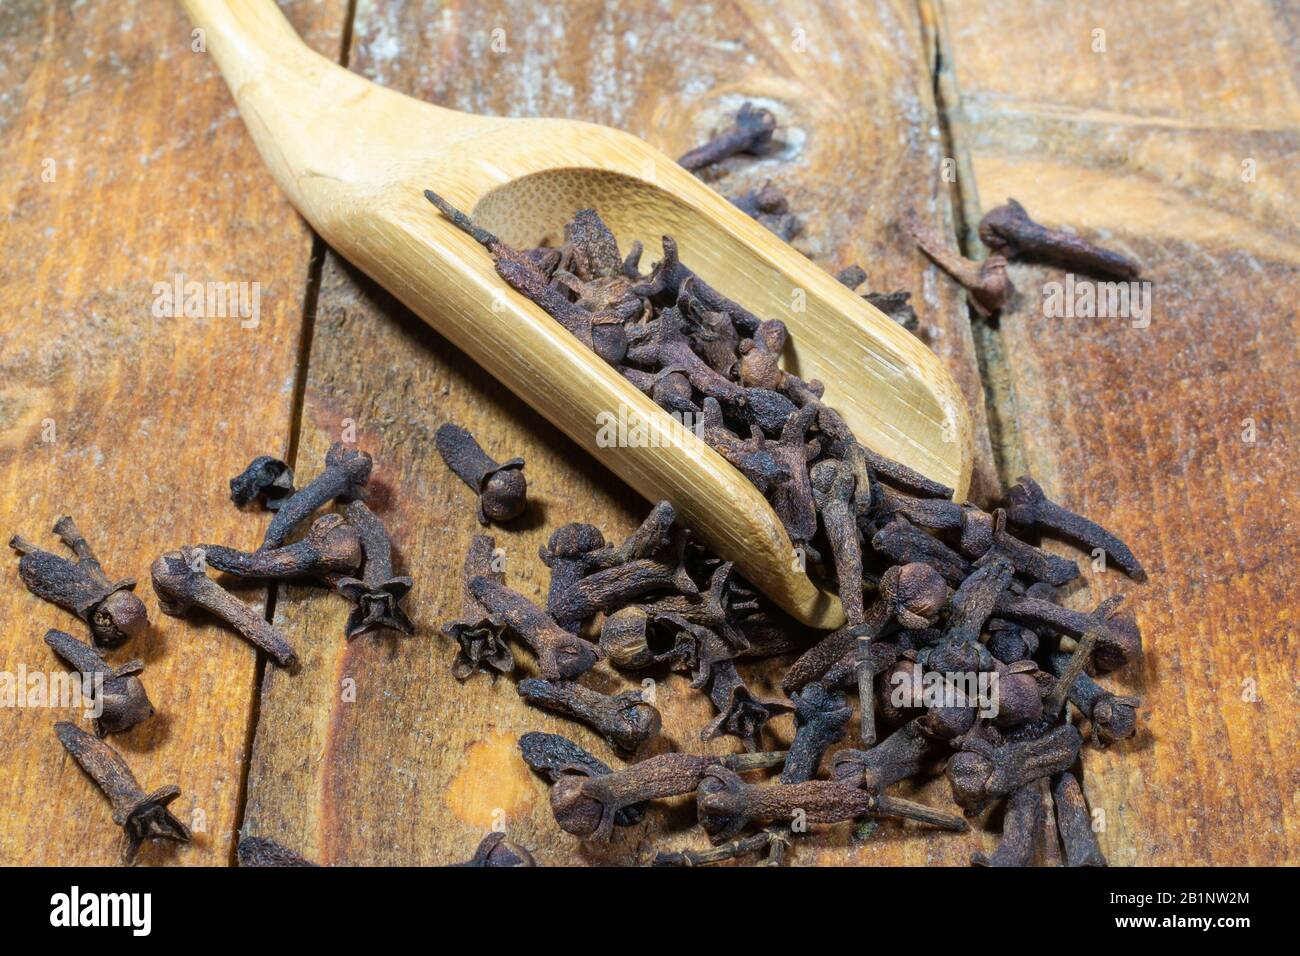 Dried whole Cloves (Syzygium aromaticum) in a wooden scoop Stock Photo